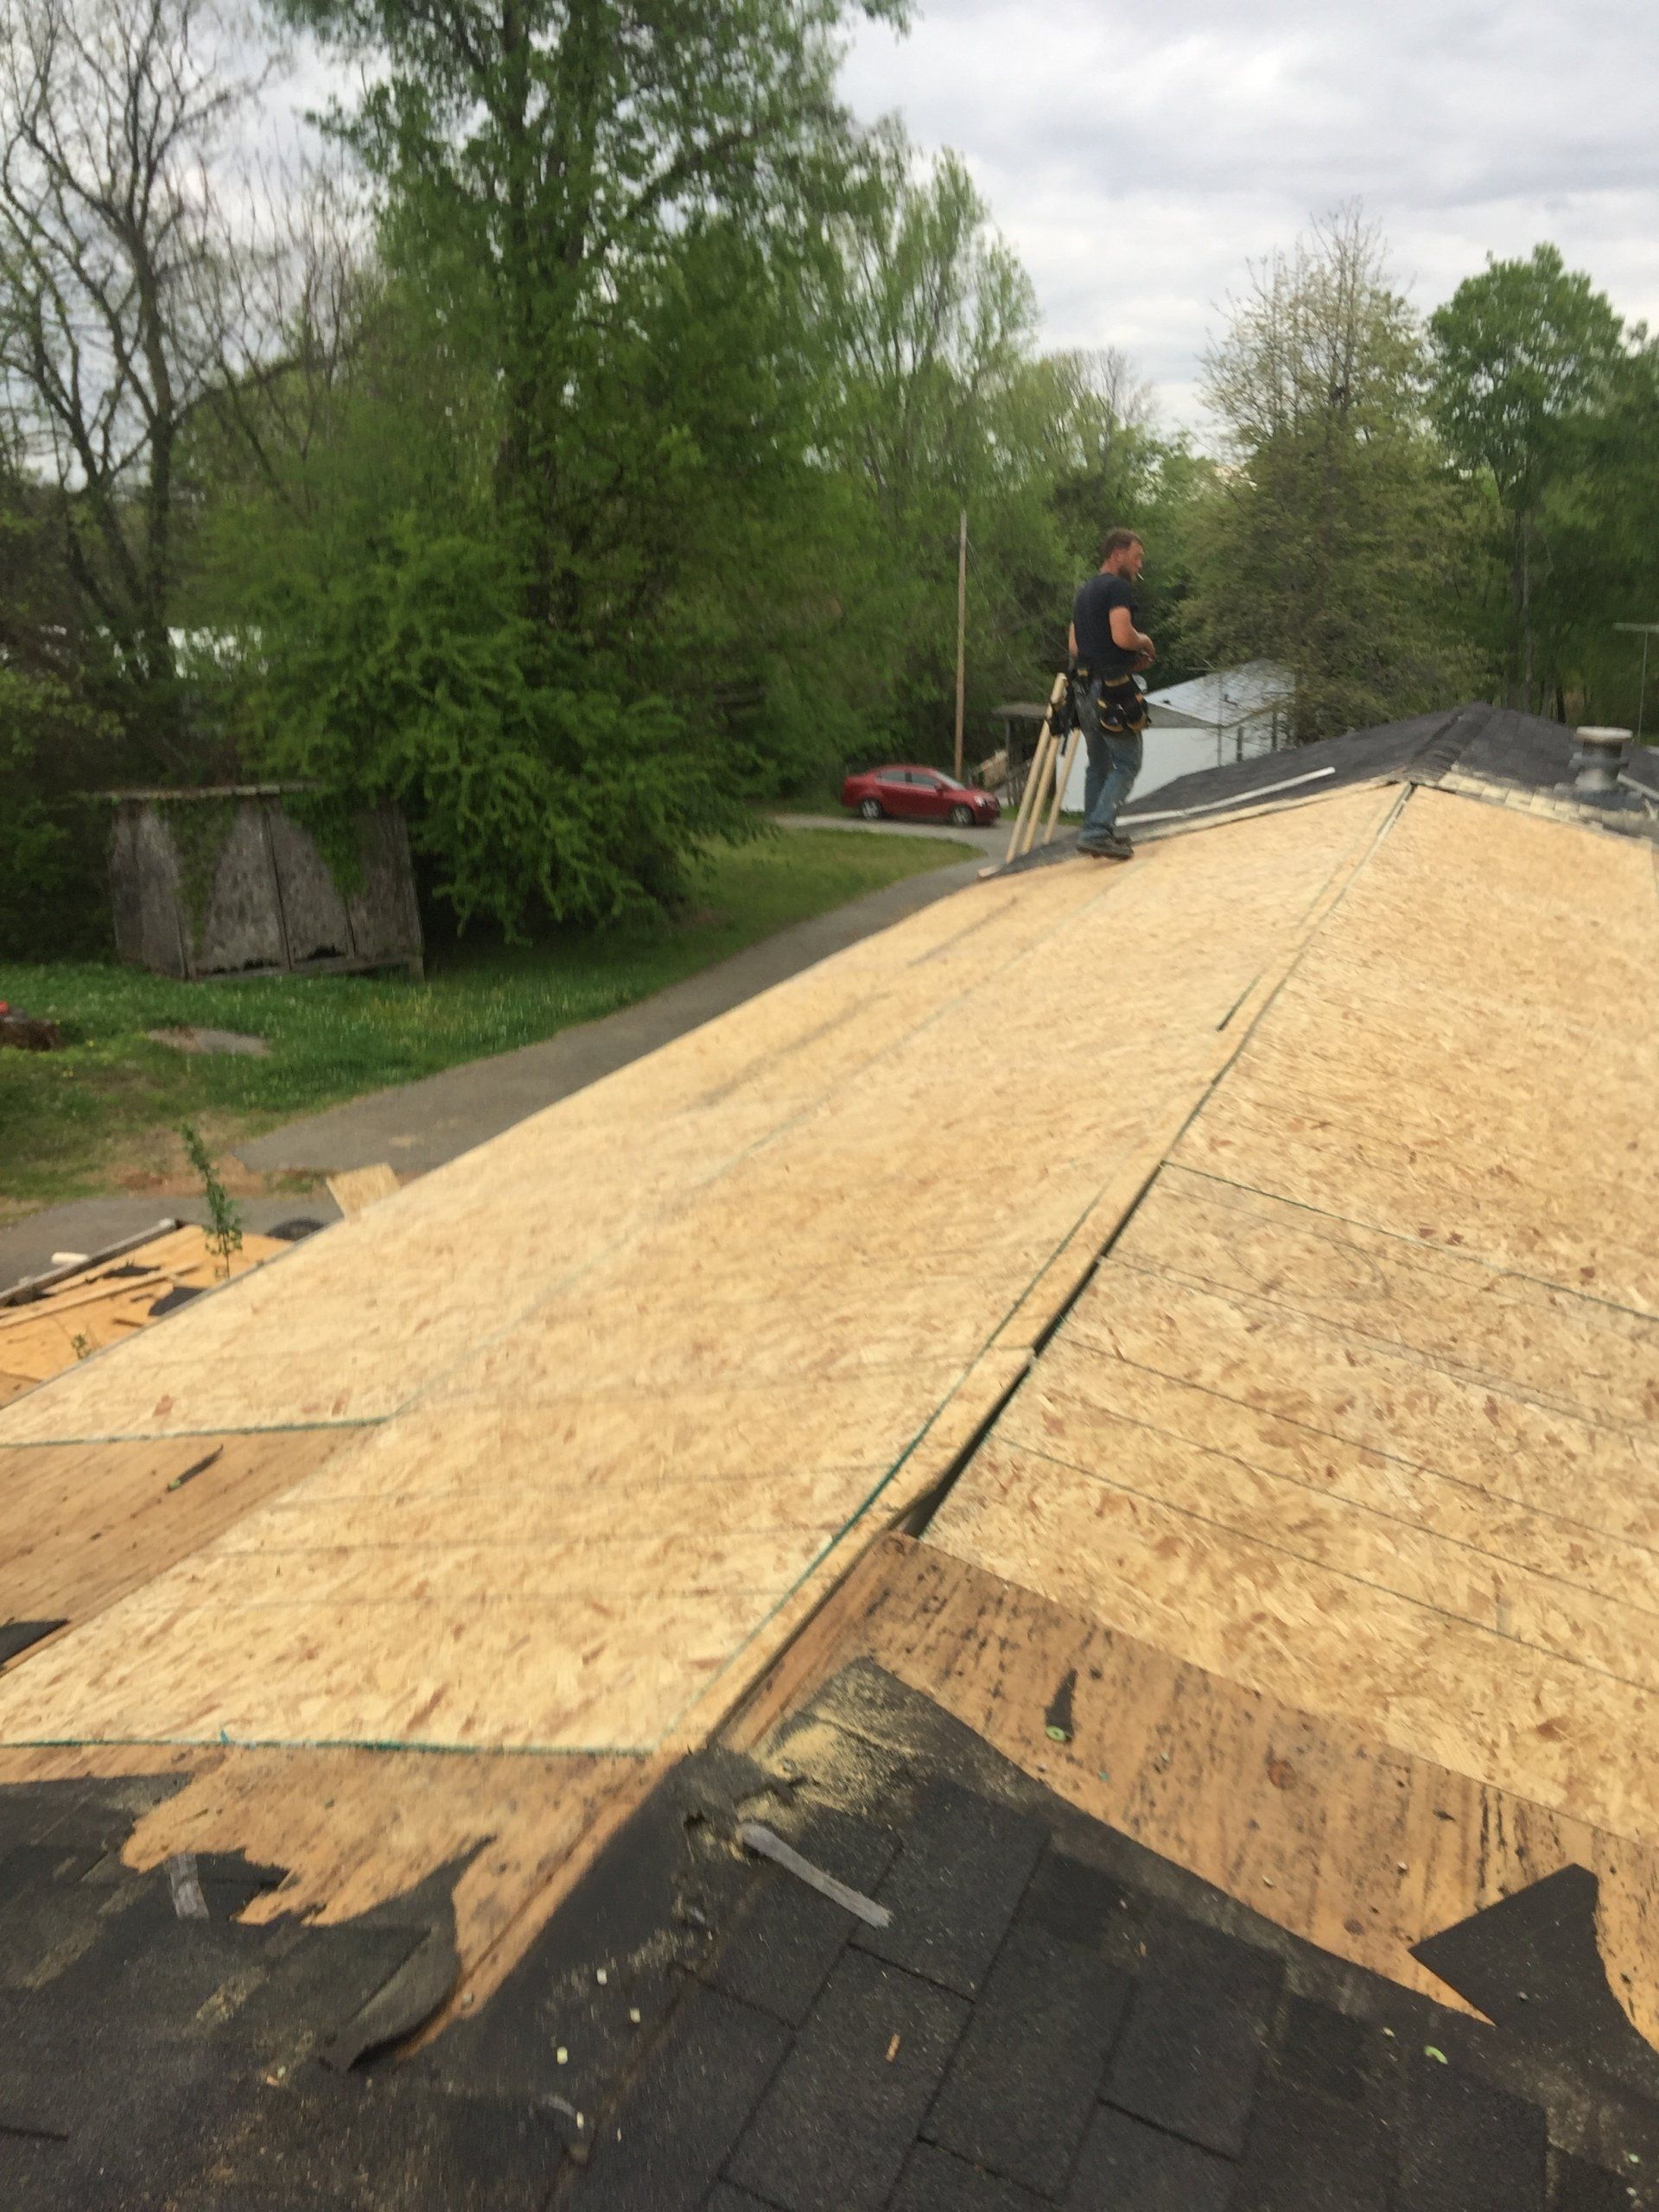 Professional roofer inspecting newly installed wood sheathing before roof replacement